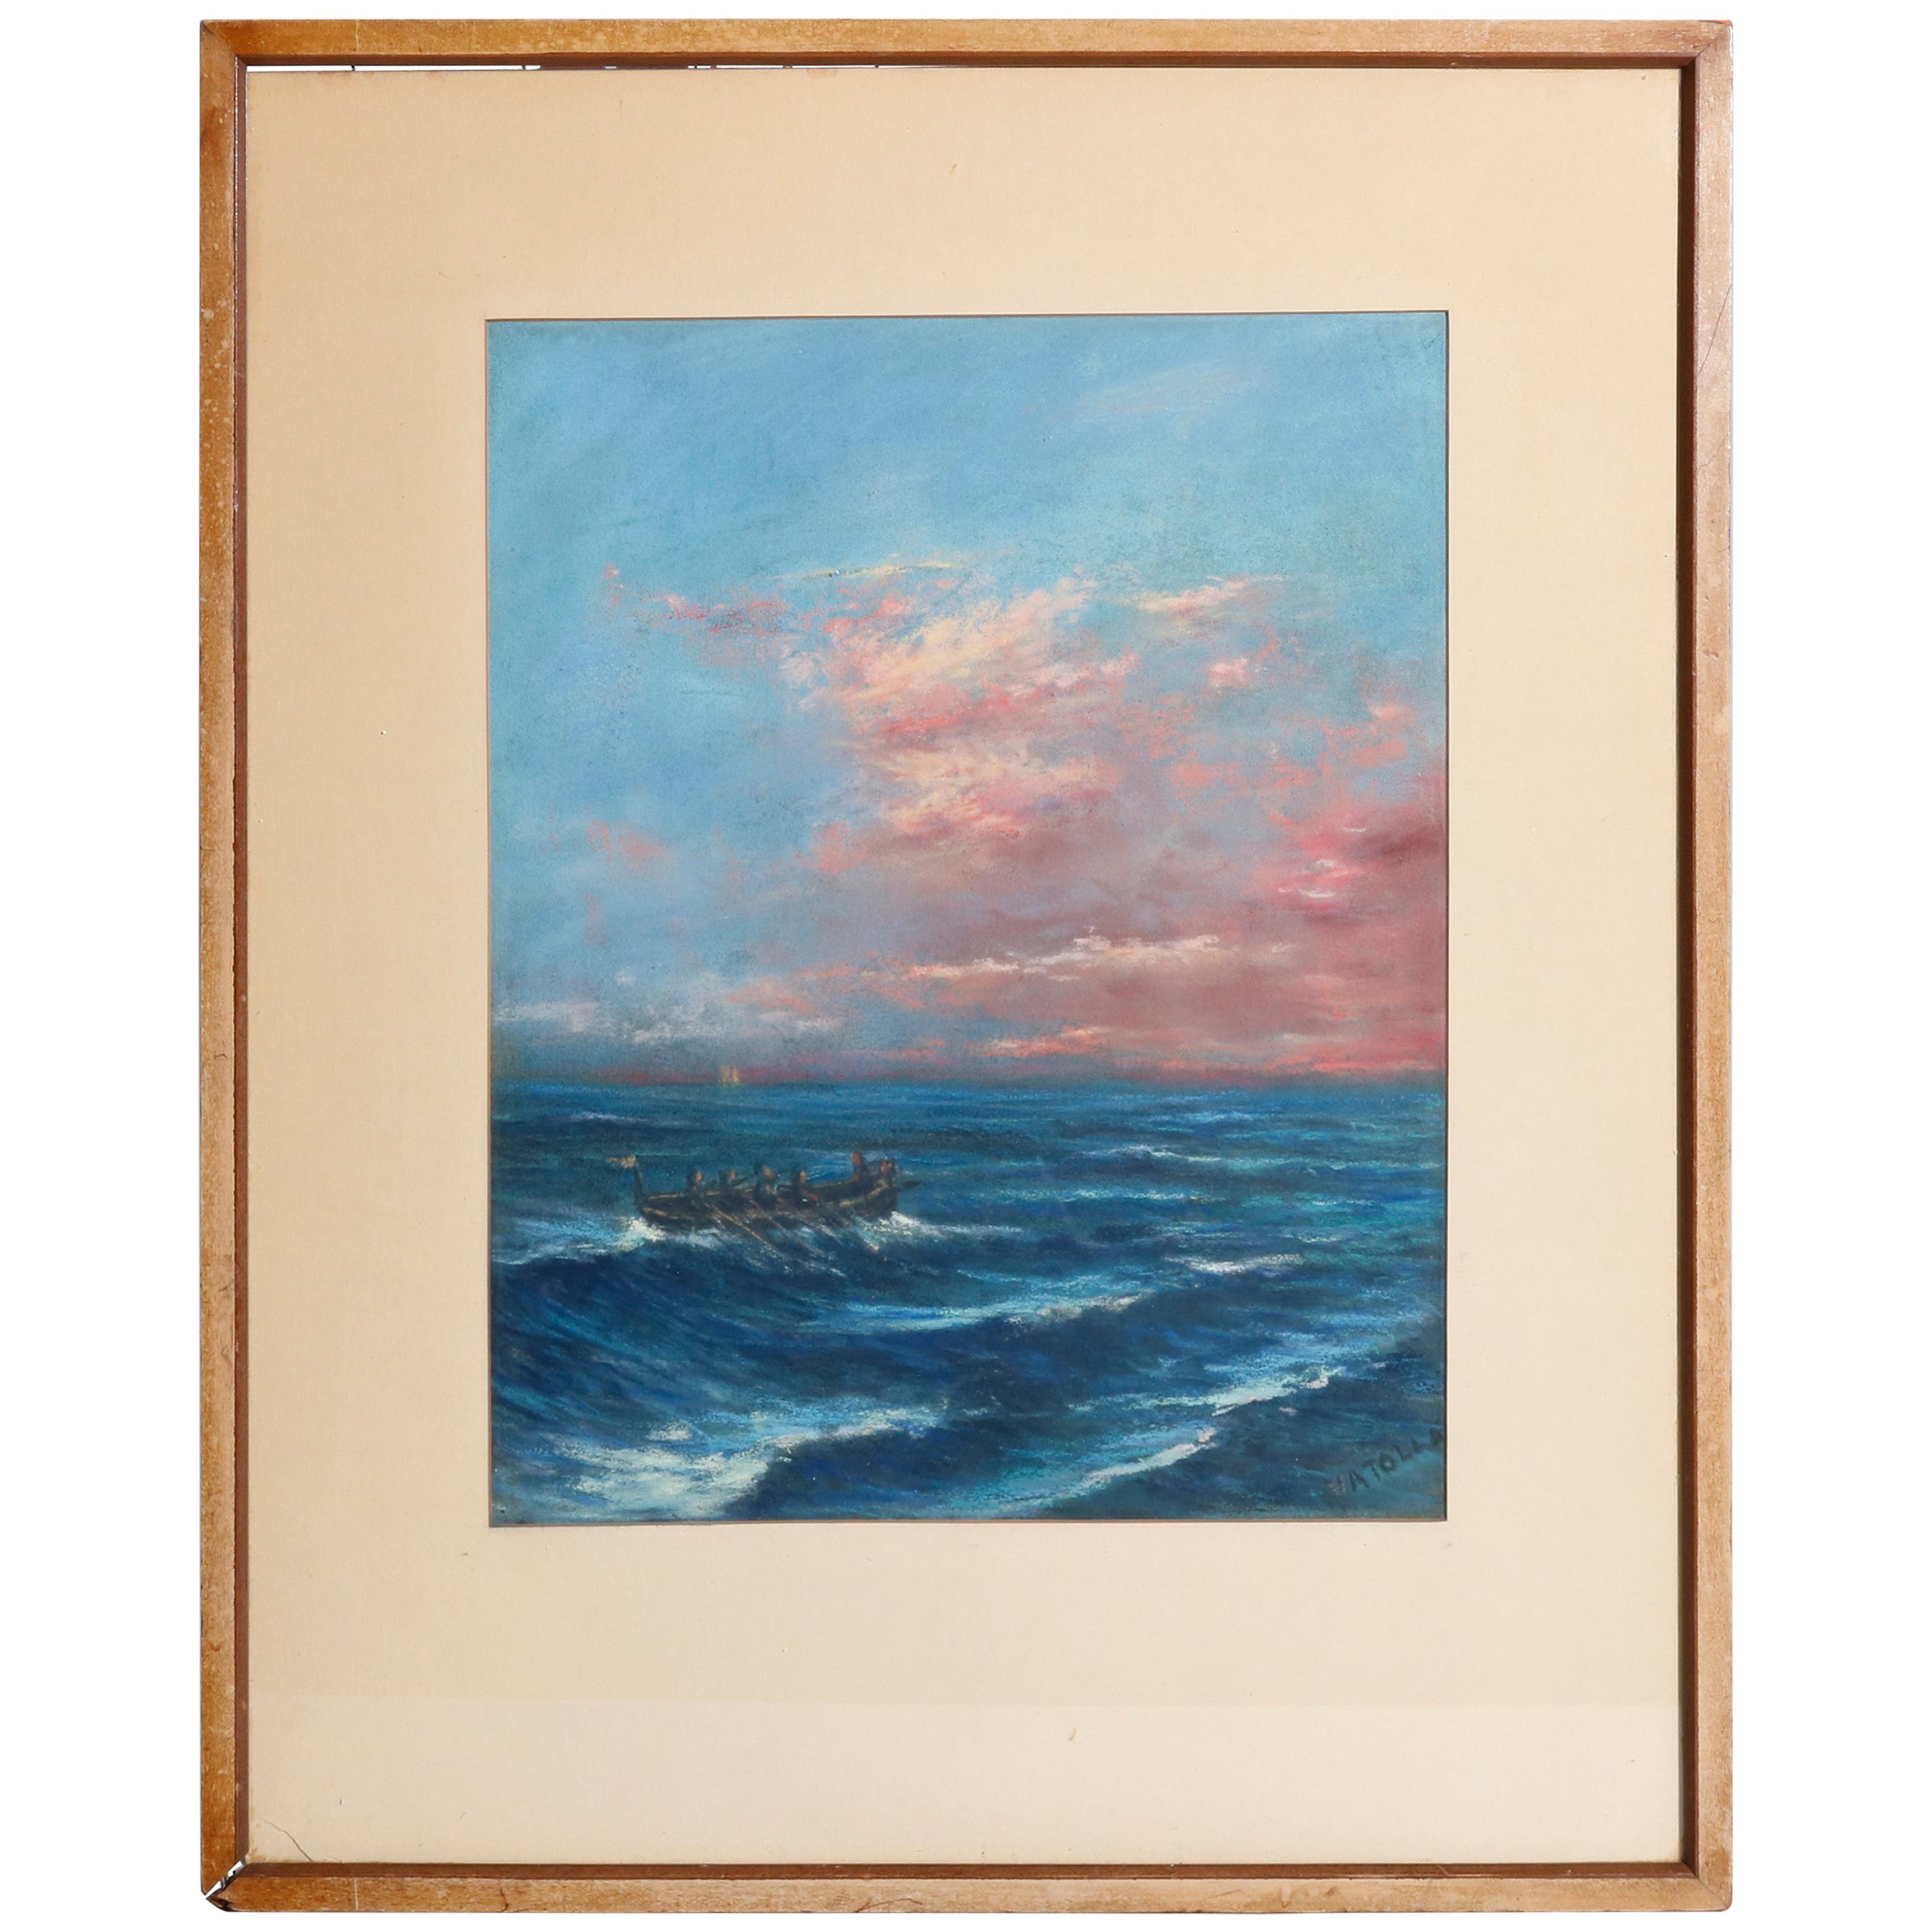 Antique Seascape Pastel Painting on Paper Signed Vatolla, circa 1920